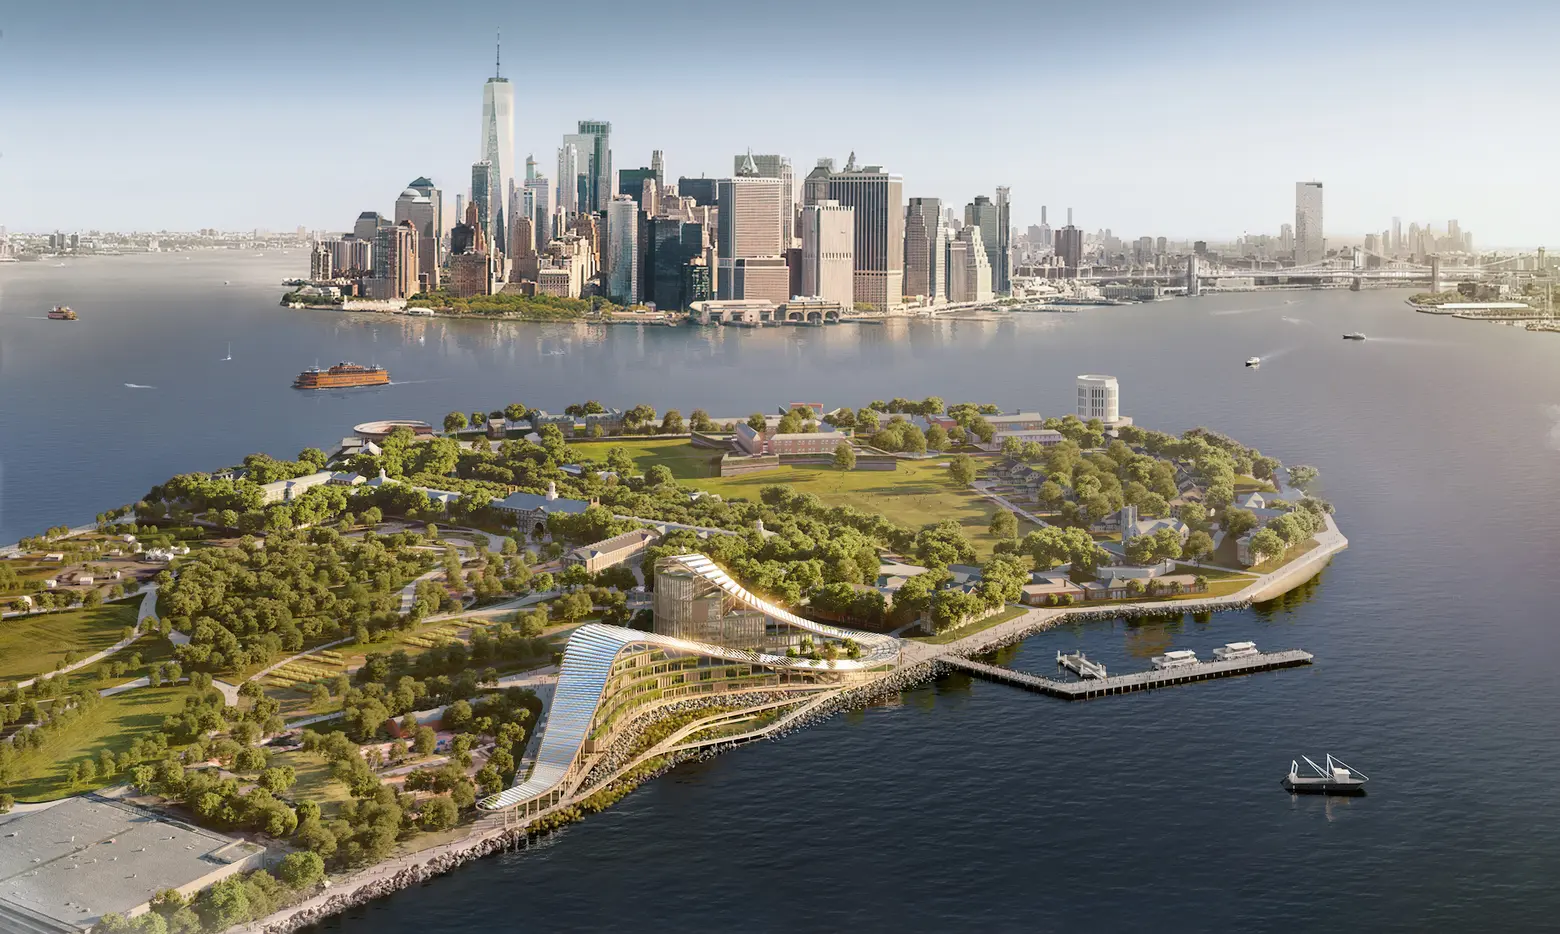 $700M climate research campus designed by SOM headed to Governors Island